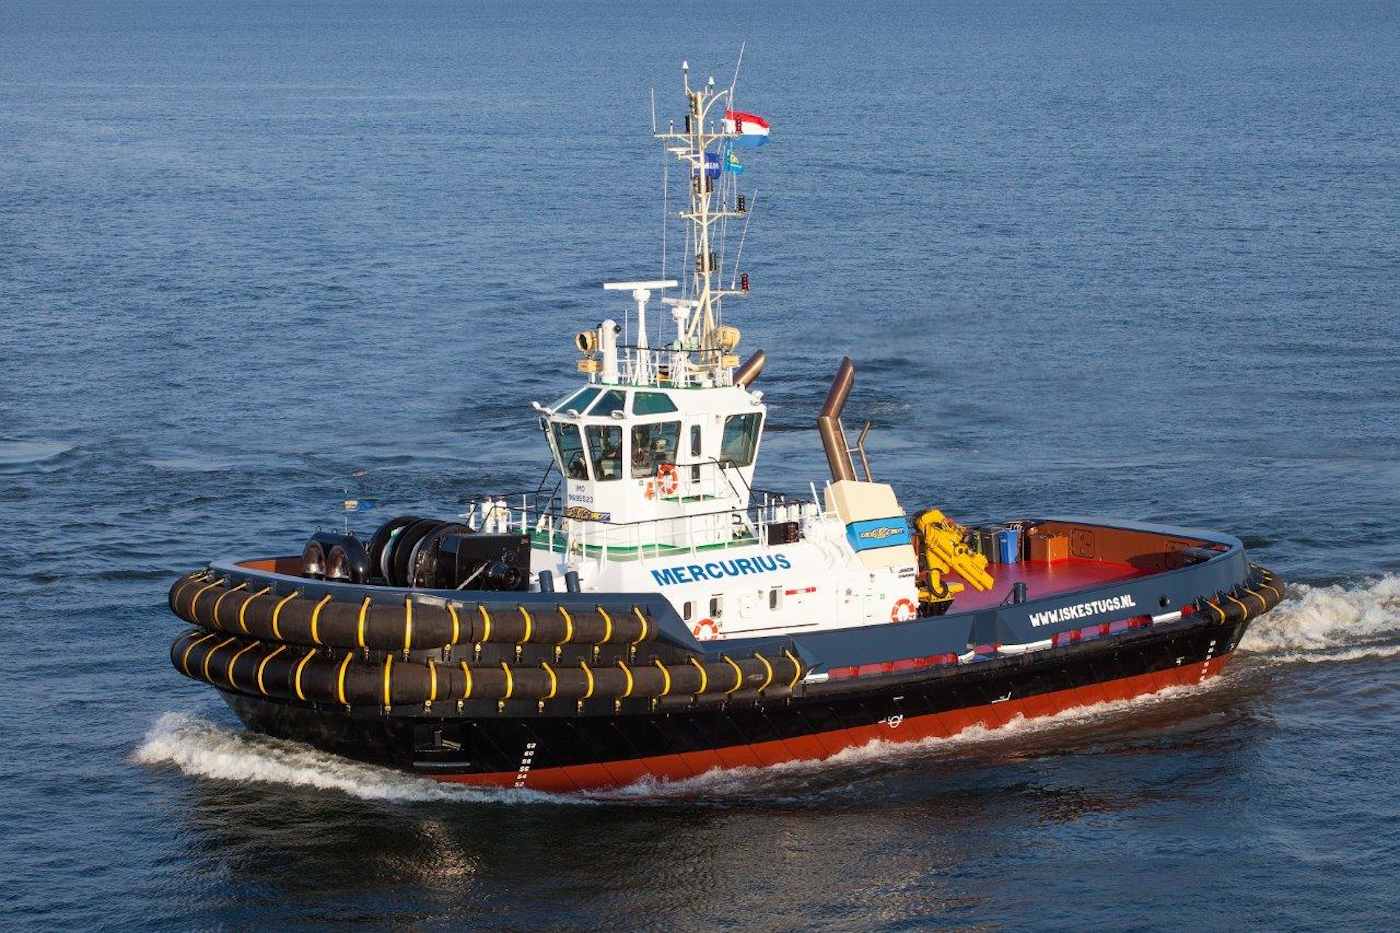 eBlue_economy_Tugs Towing & Offshore_Newsletter 60 2022 - PDF